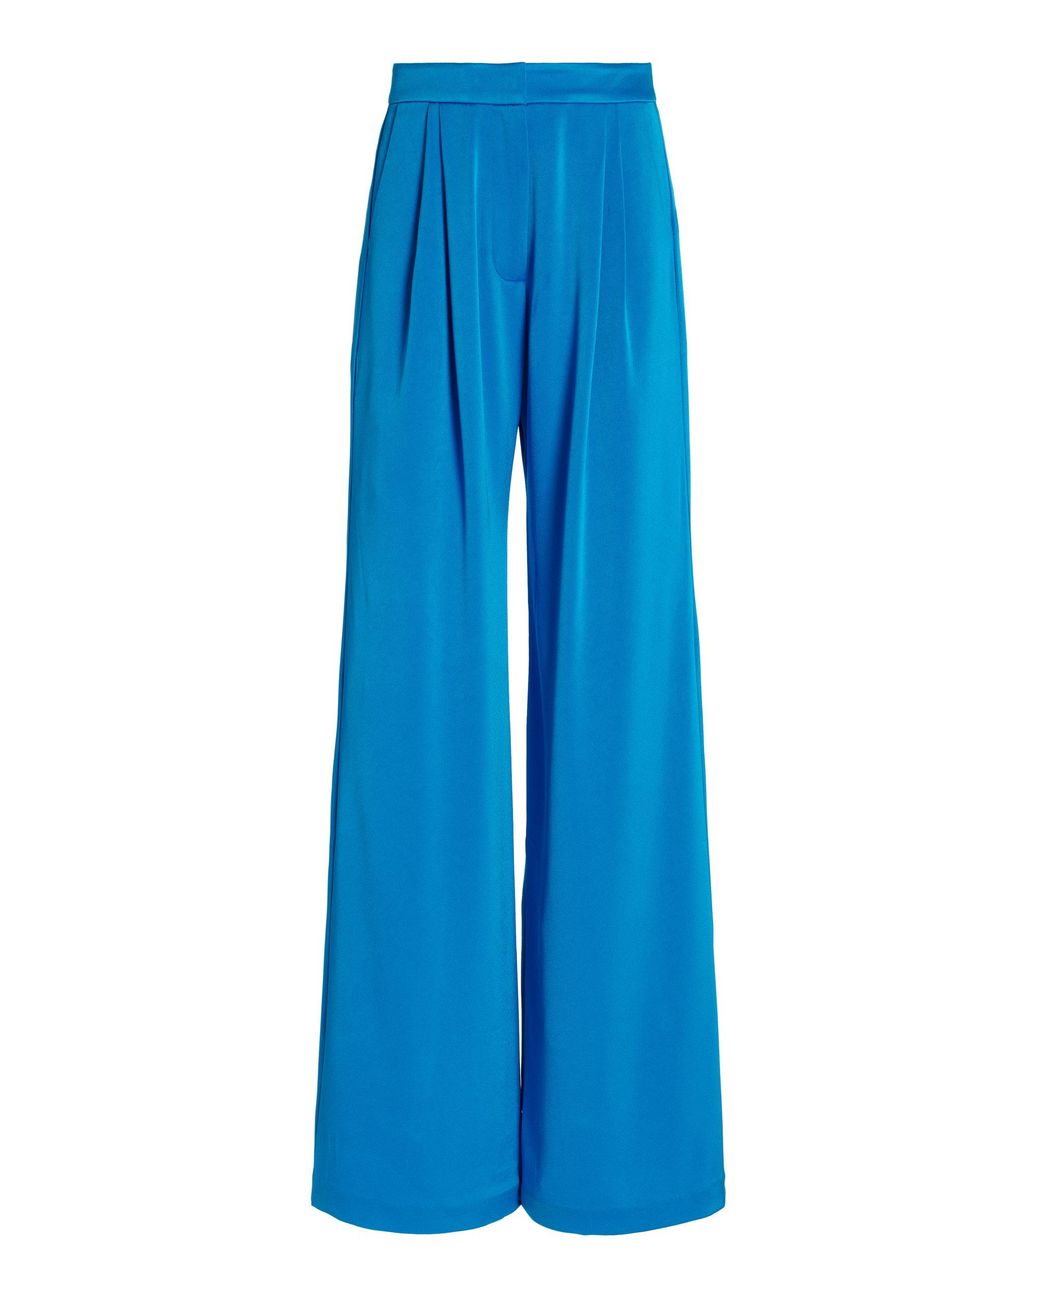 Alex Perry Hutton Pleated Satin-crepe Wide-leg Pants in Blue | Lyst